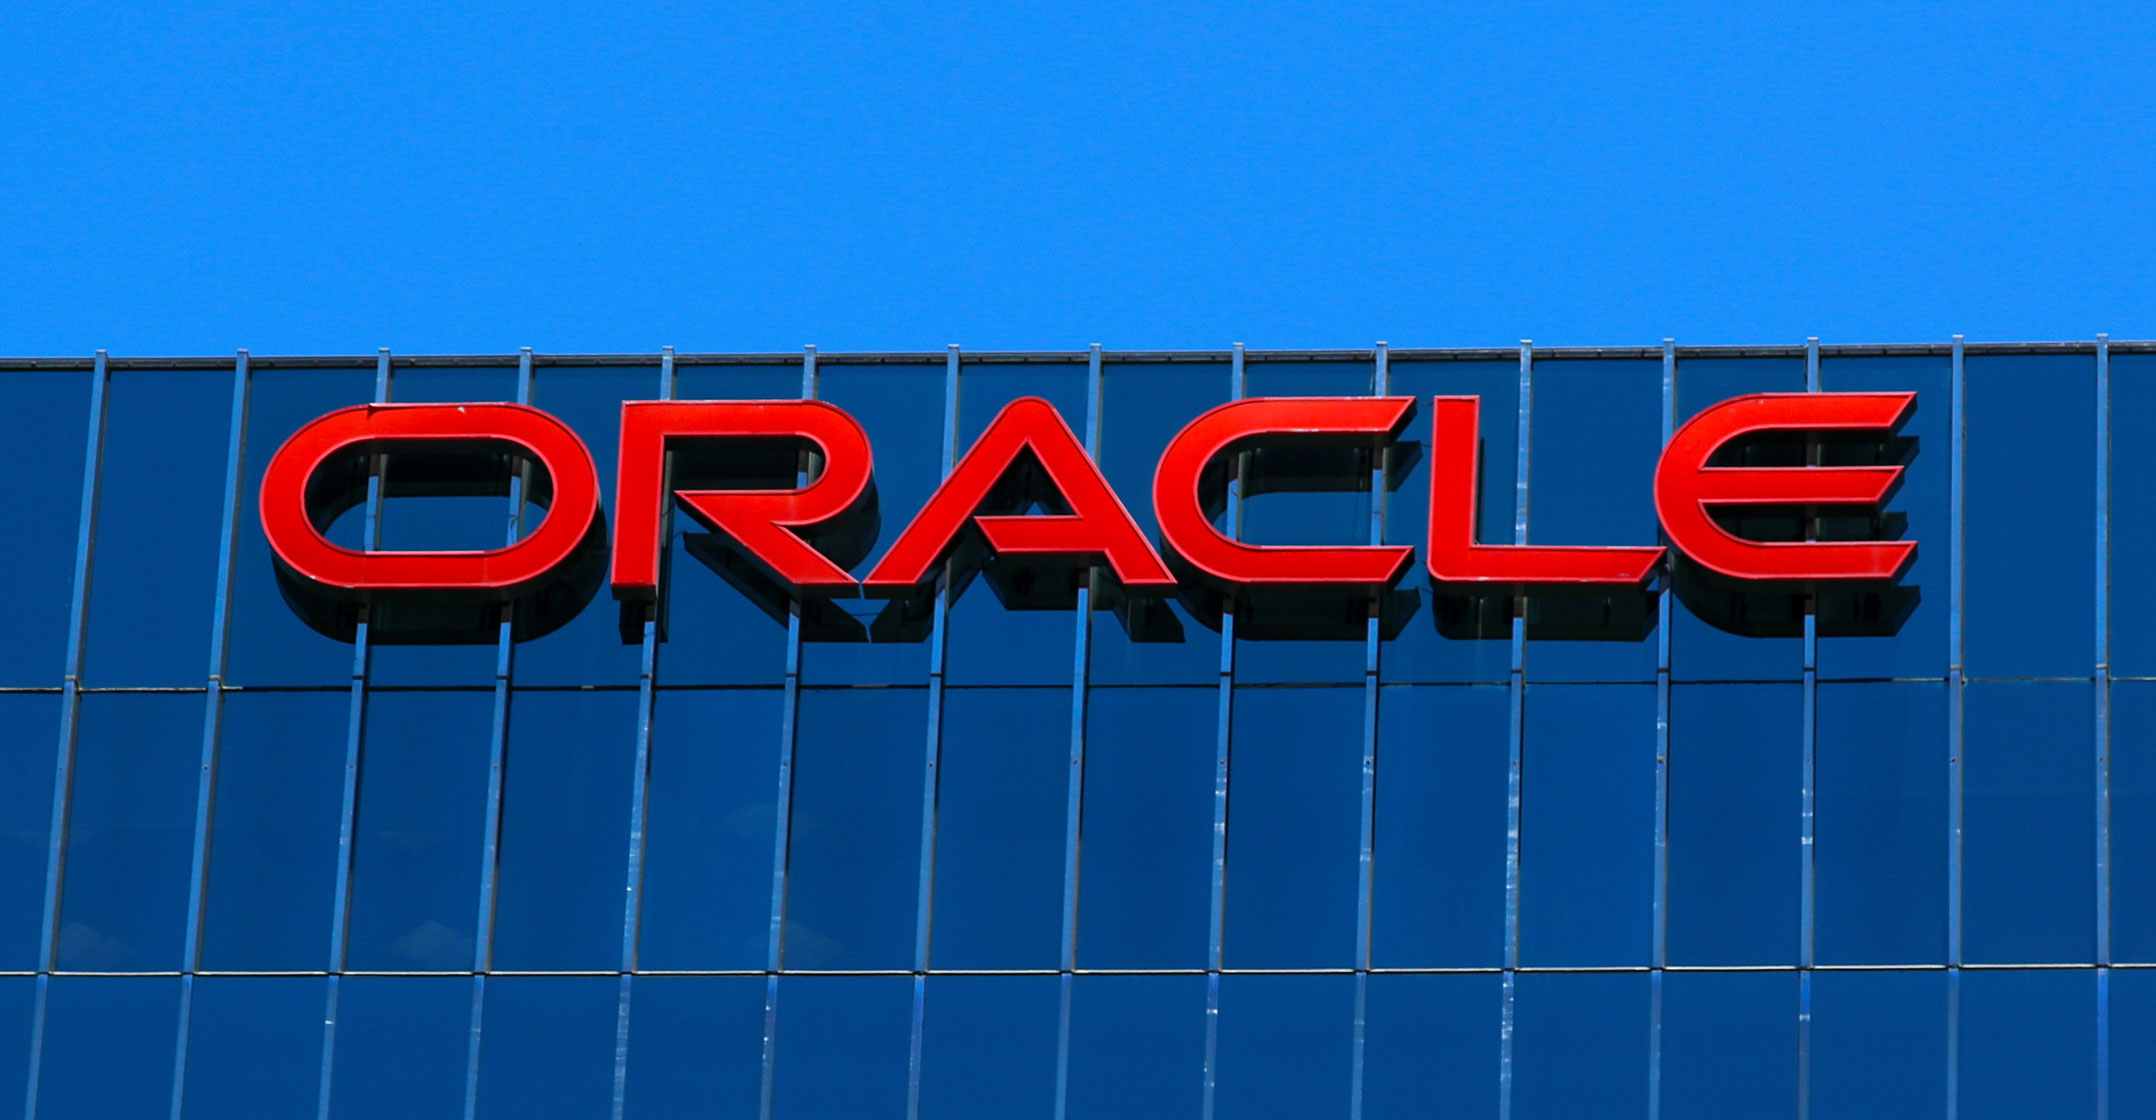 https://techcentral.co.za/wp-content/uploads/2020/09/re-oracle-2156-1120.jpg